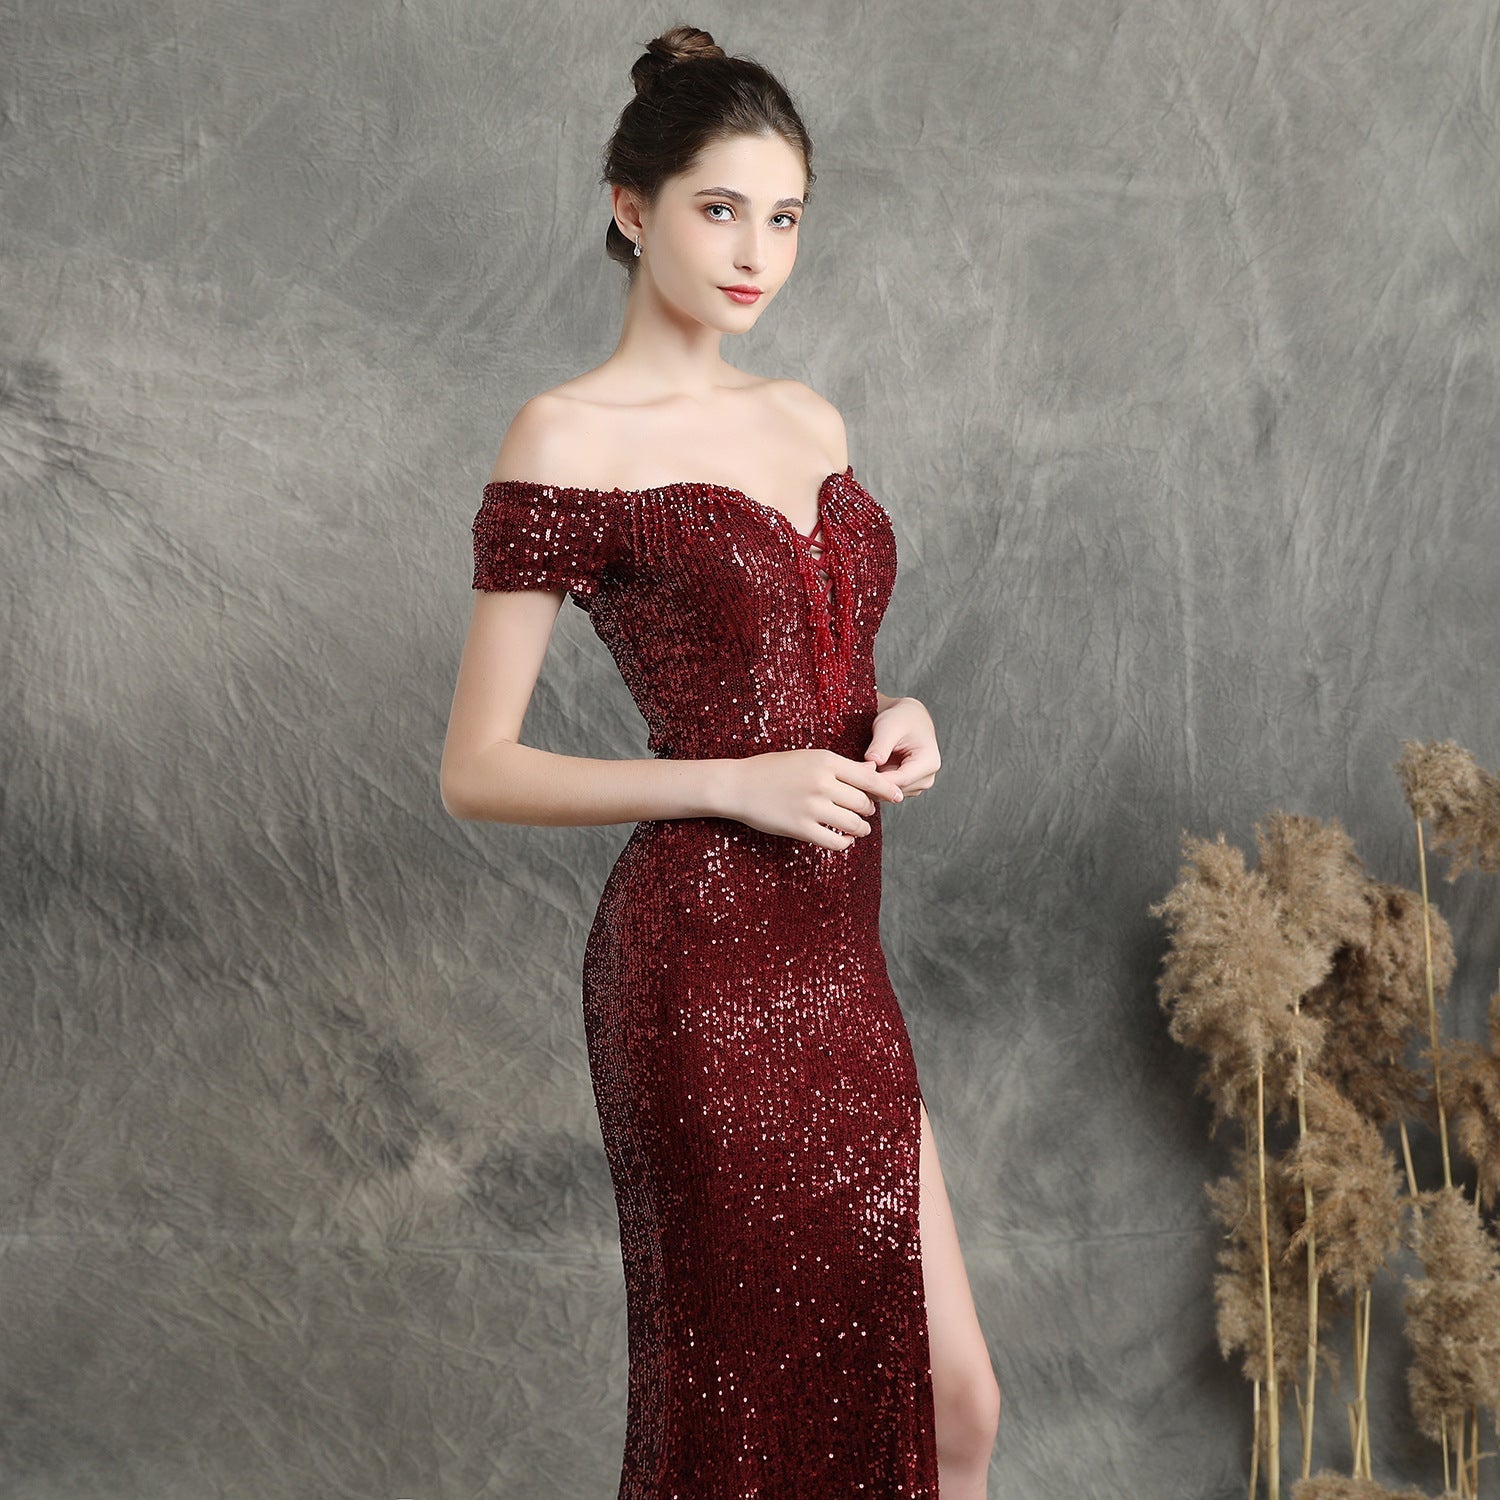 Marzia Formal Sequined Slit Dress - Lady Occasions